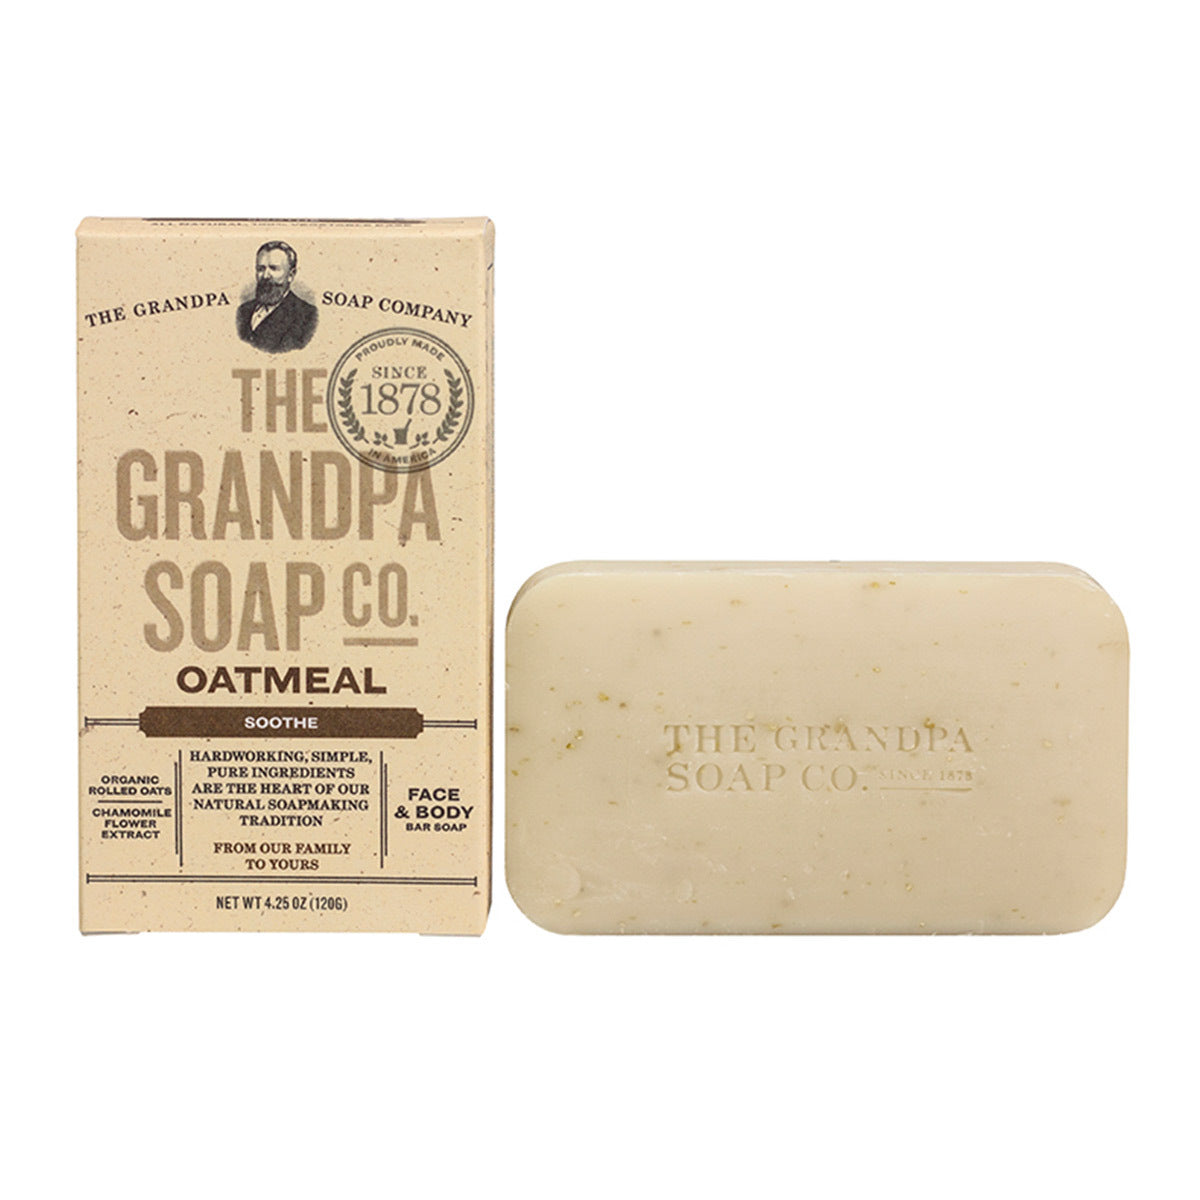 Primary image of Oatmeal Soap